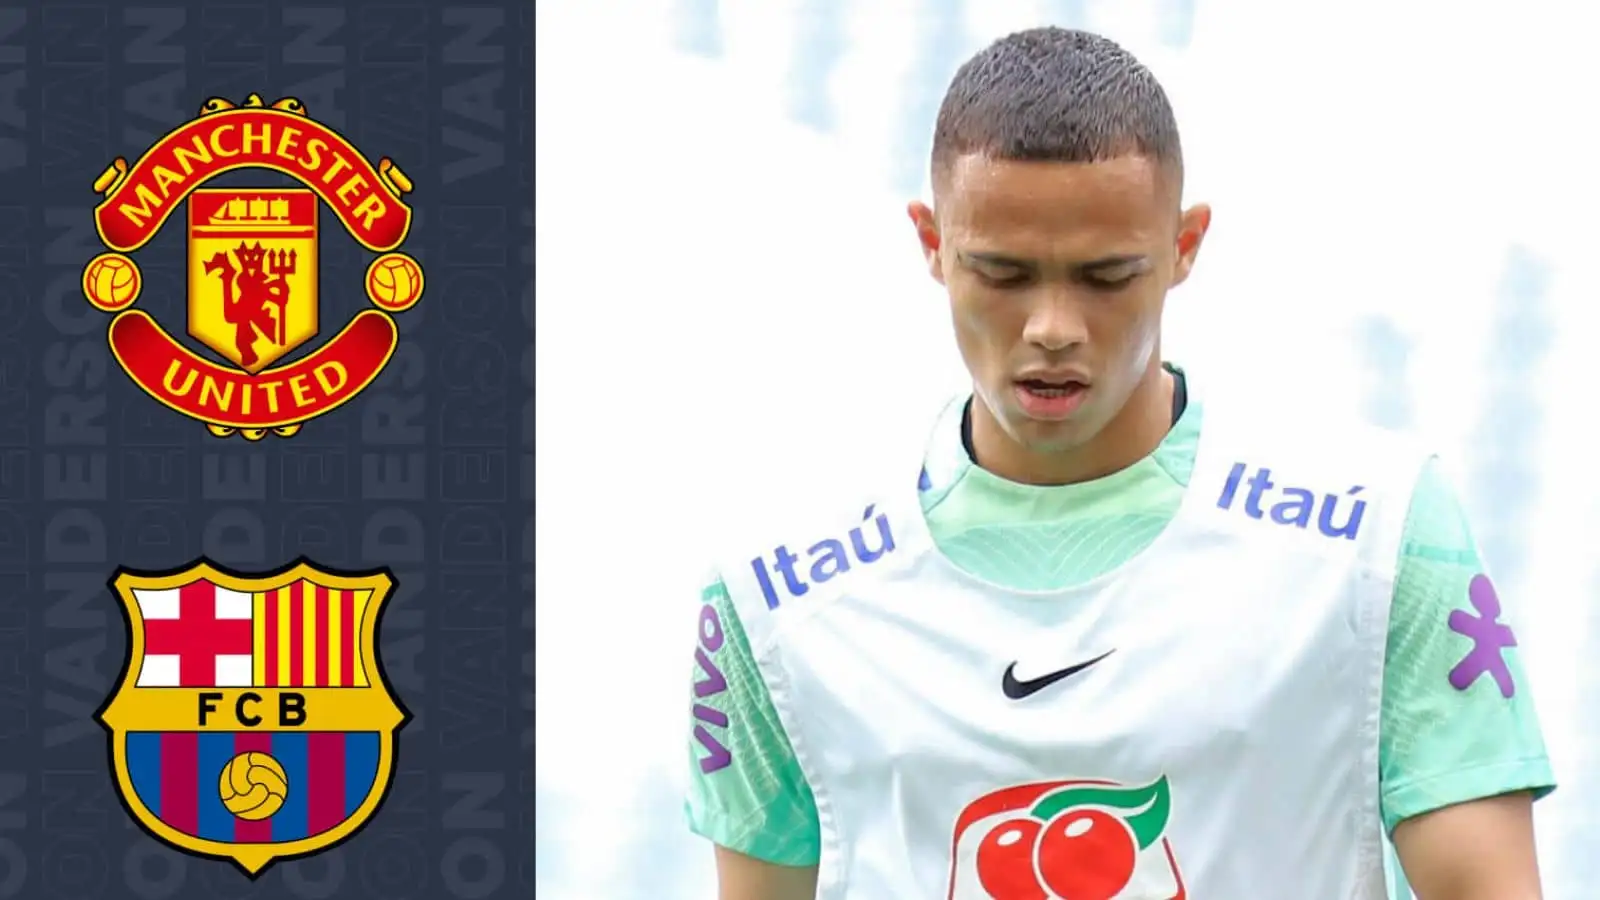 Monaco star Vanderson is wanted by Manchester United and Barcelona